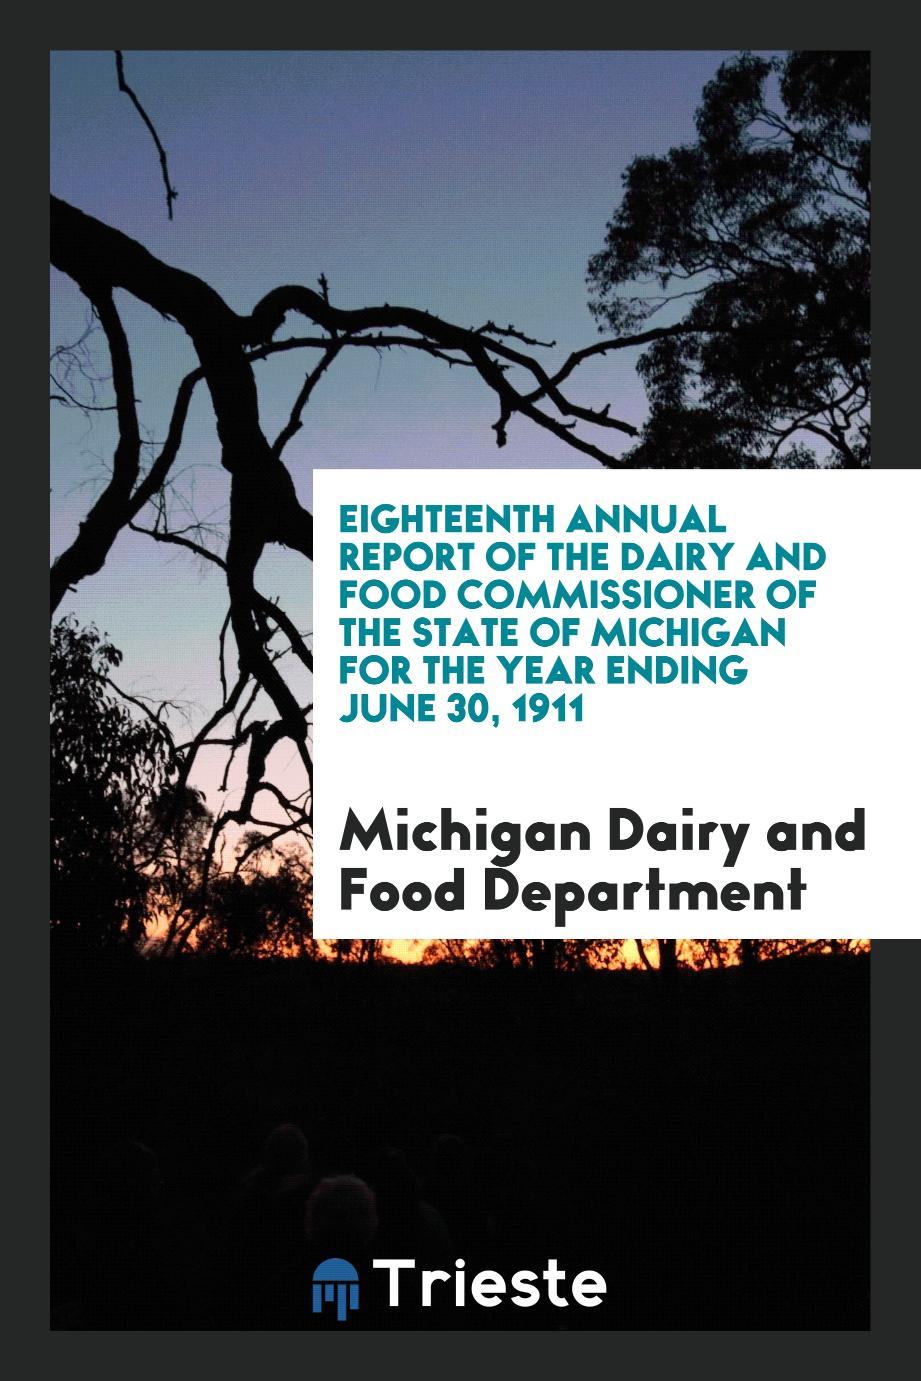 Eighteenth Annual Report of the Dairy and Food Commissioner of the State of Michigan for the Year Ending June 30, 1911